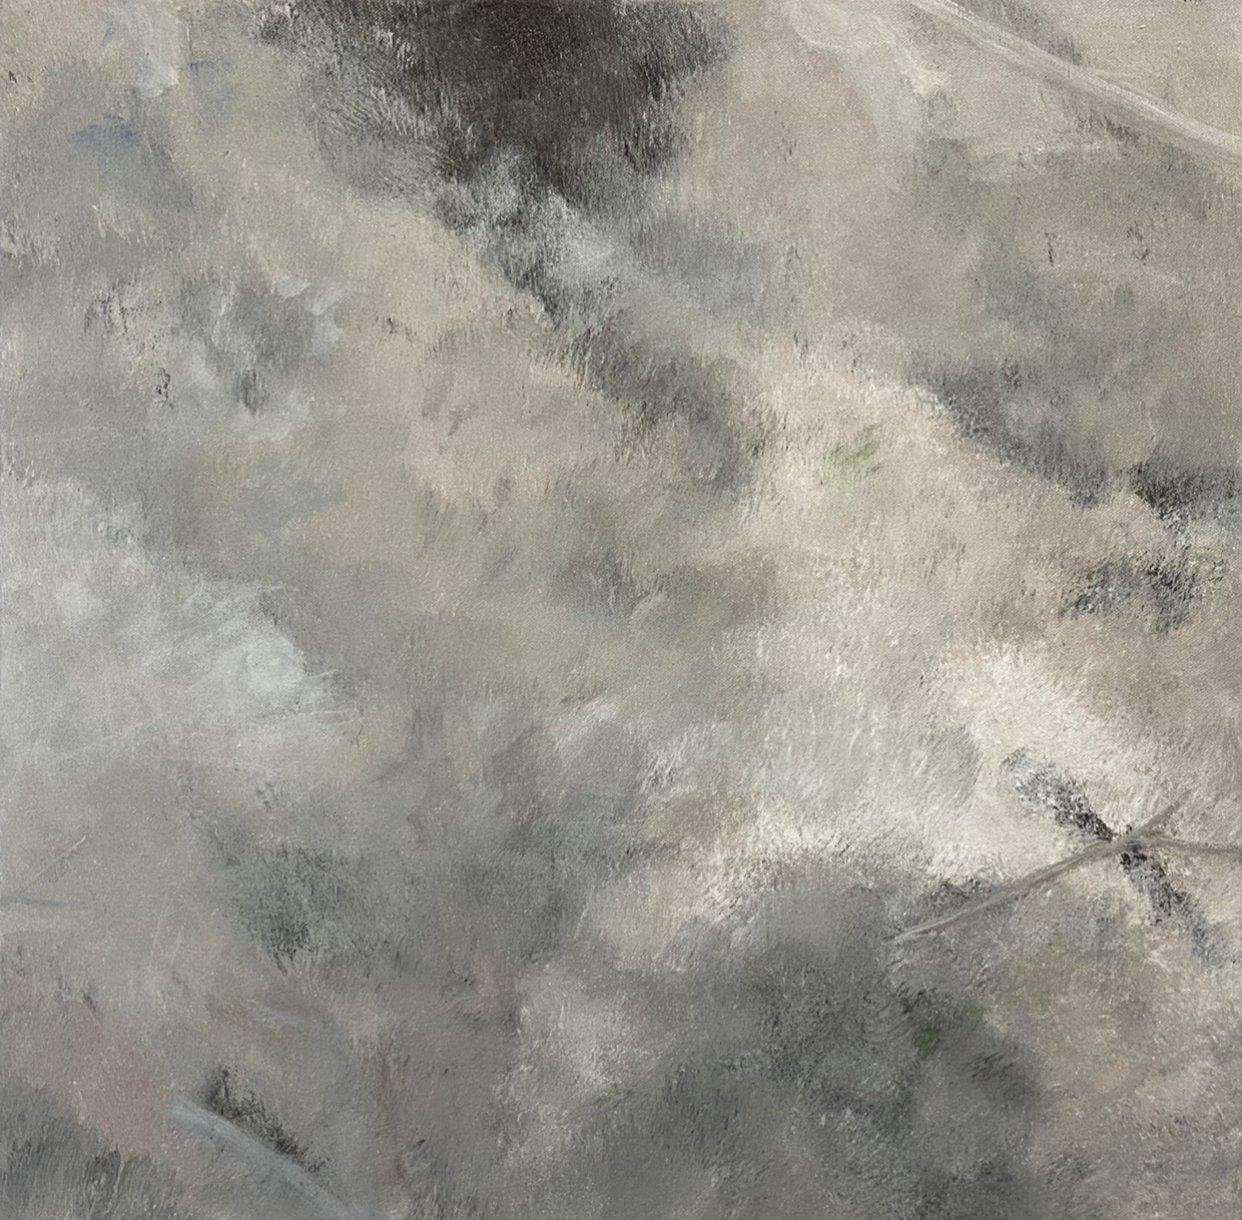 Some simple dirt, neutral landscape, 2021, Acrylic on canvas - Painting by Juanita Bellavance 